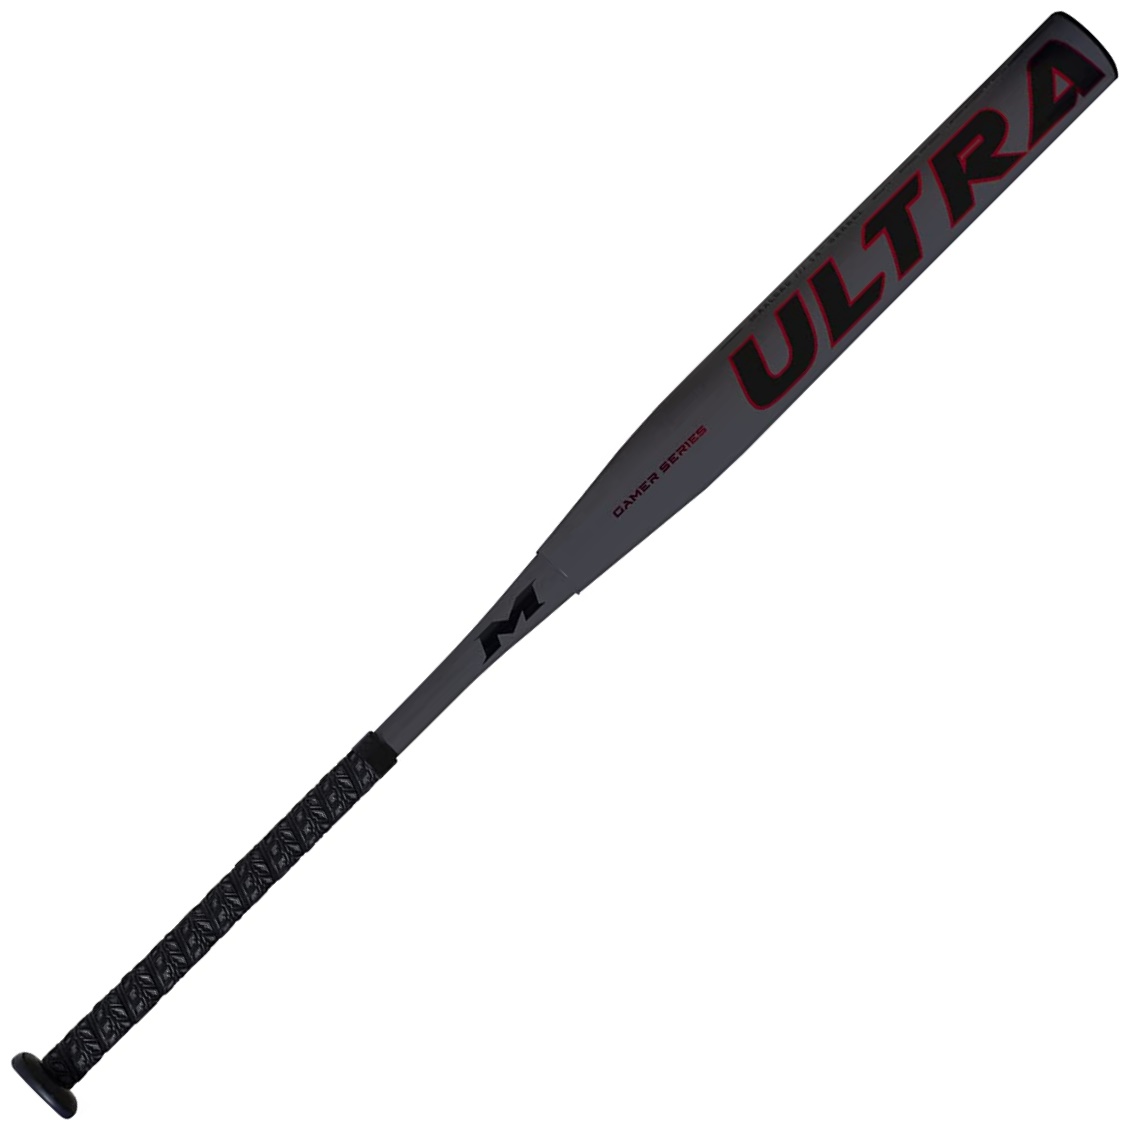 miken-ultra-gamer-series-two-piece-maxload-14-barrel-ssusa-slowpitch-softball-bat-34-inch-27-oz MUL21S-3-27   <span data-mce-fragment=1>The New Miken Ultra Gamer Series offers one of the